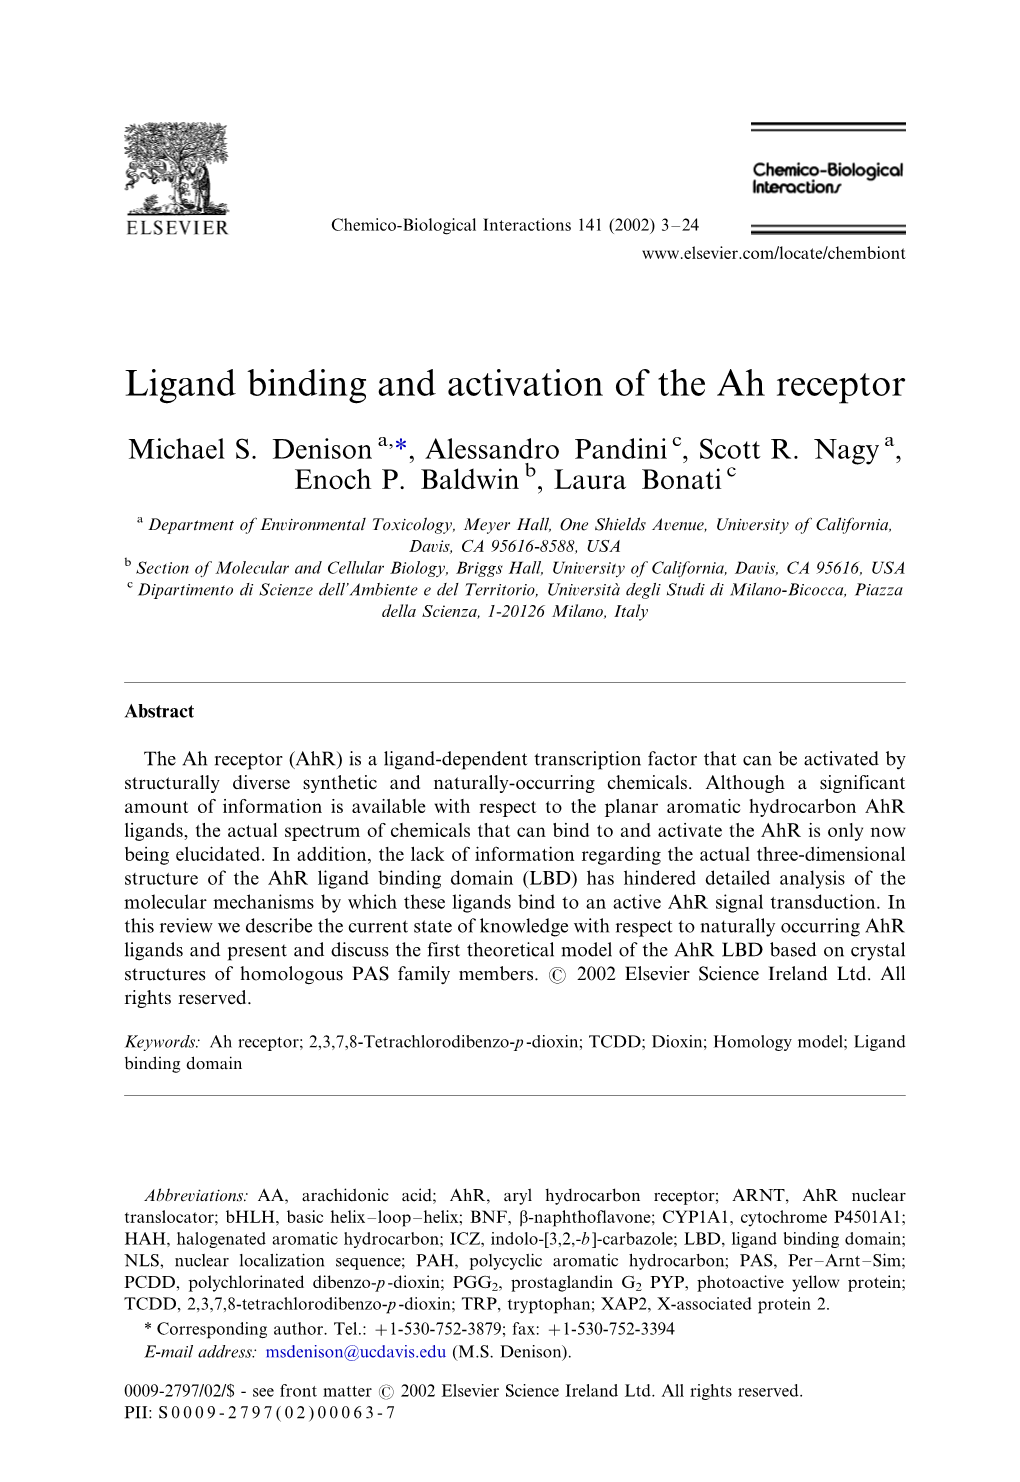 Ligand Binding and Activation of the Ah Receptor